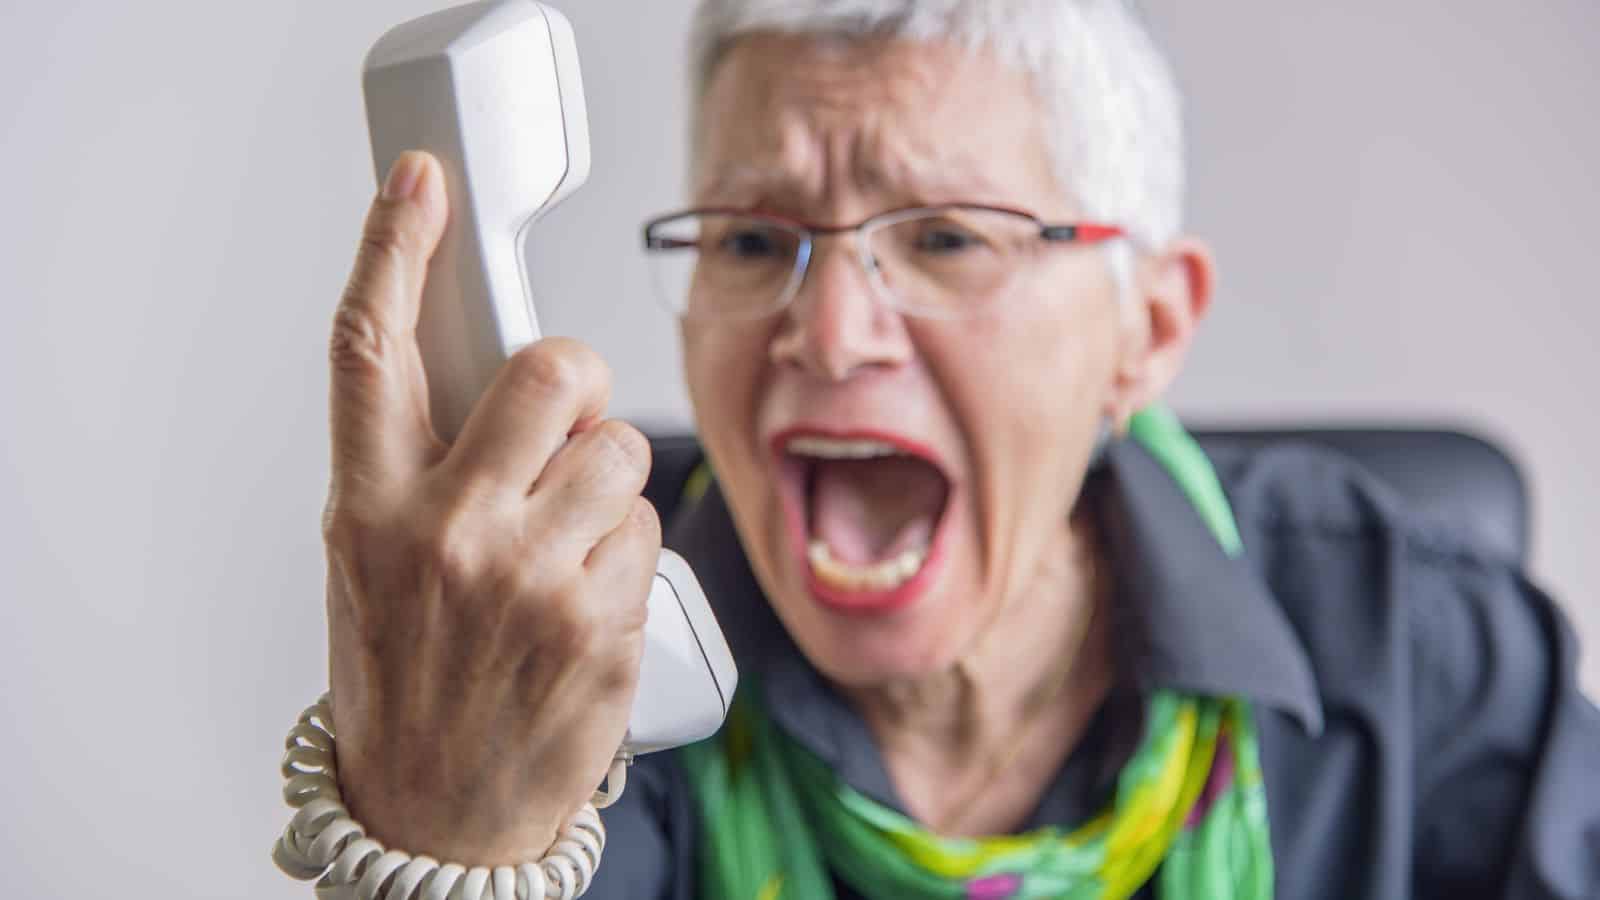 yelling at the phone over fees